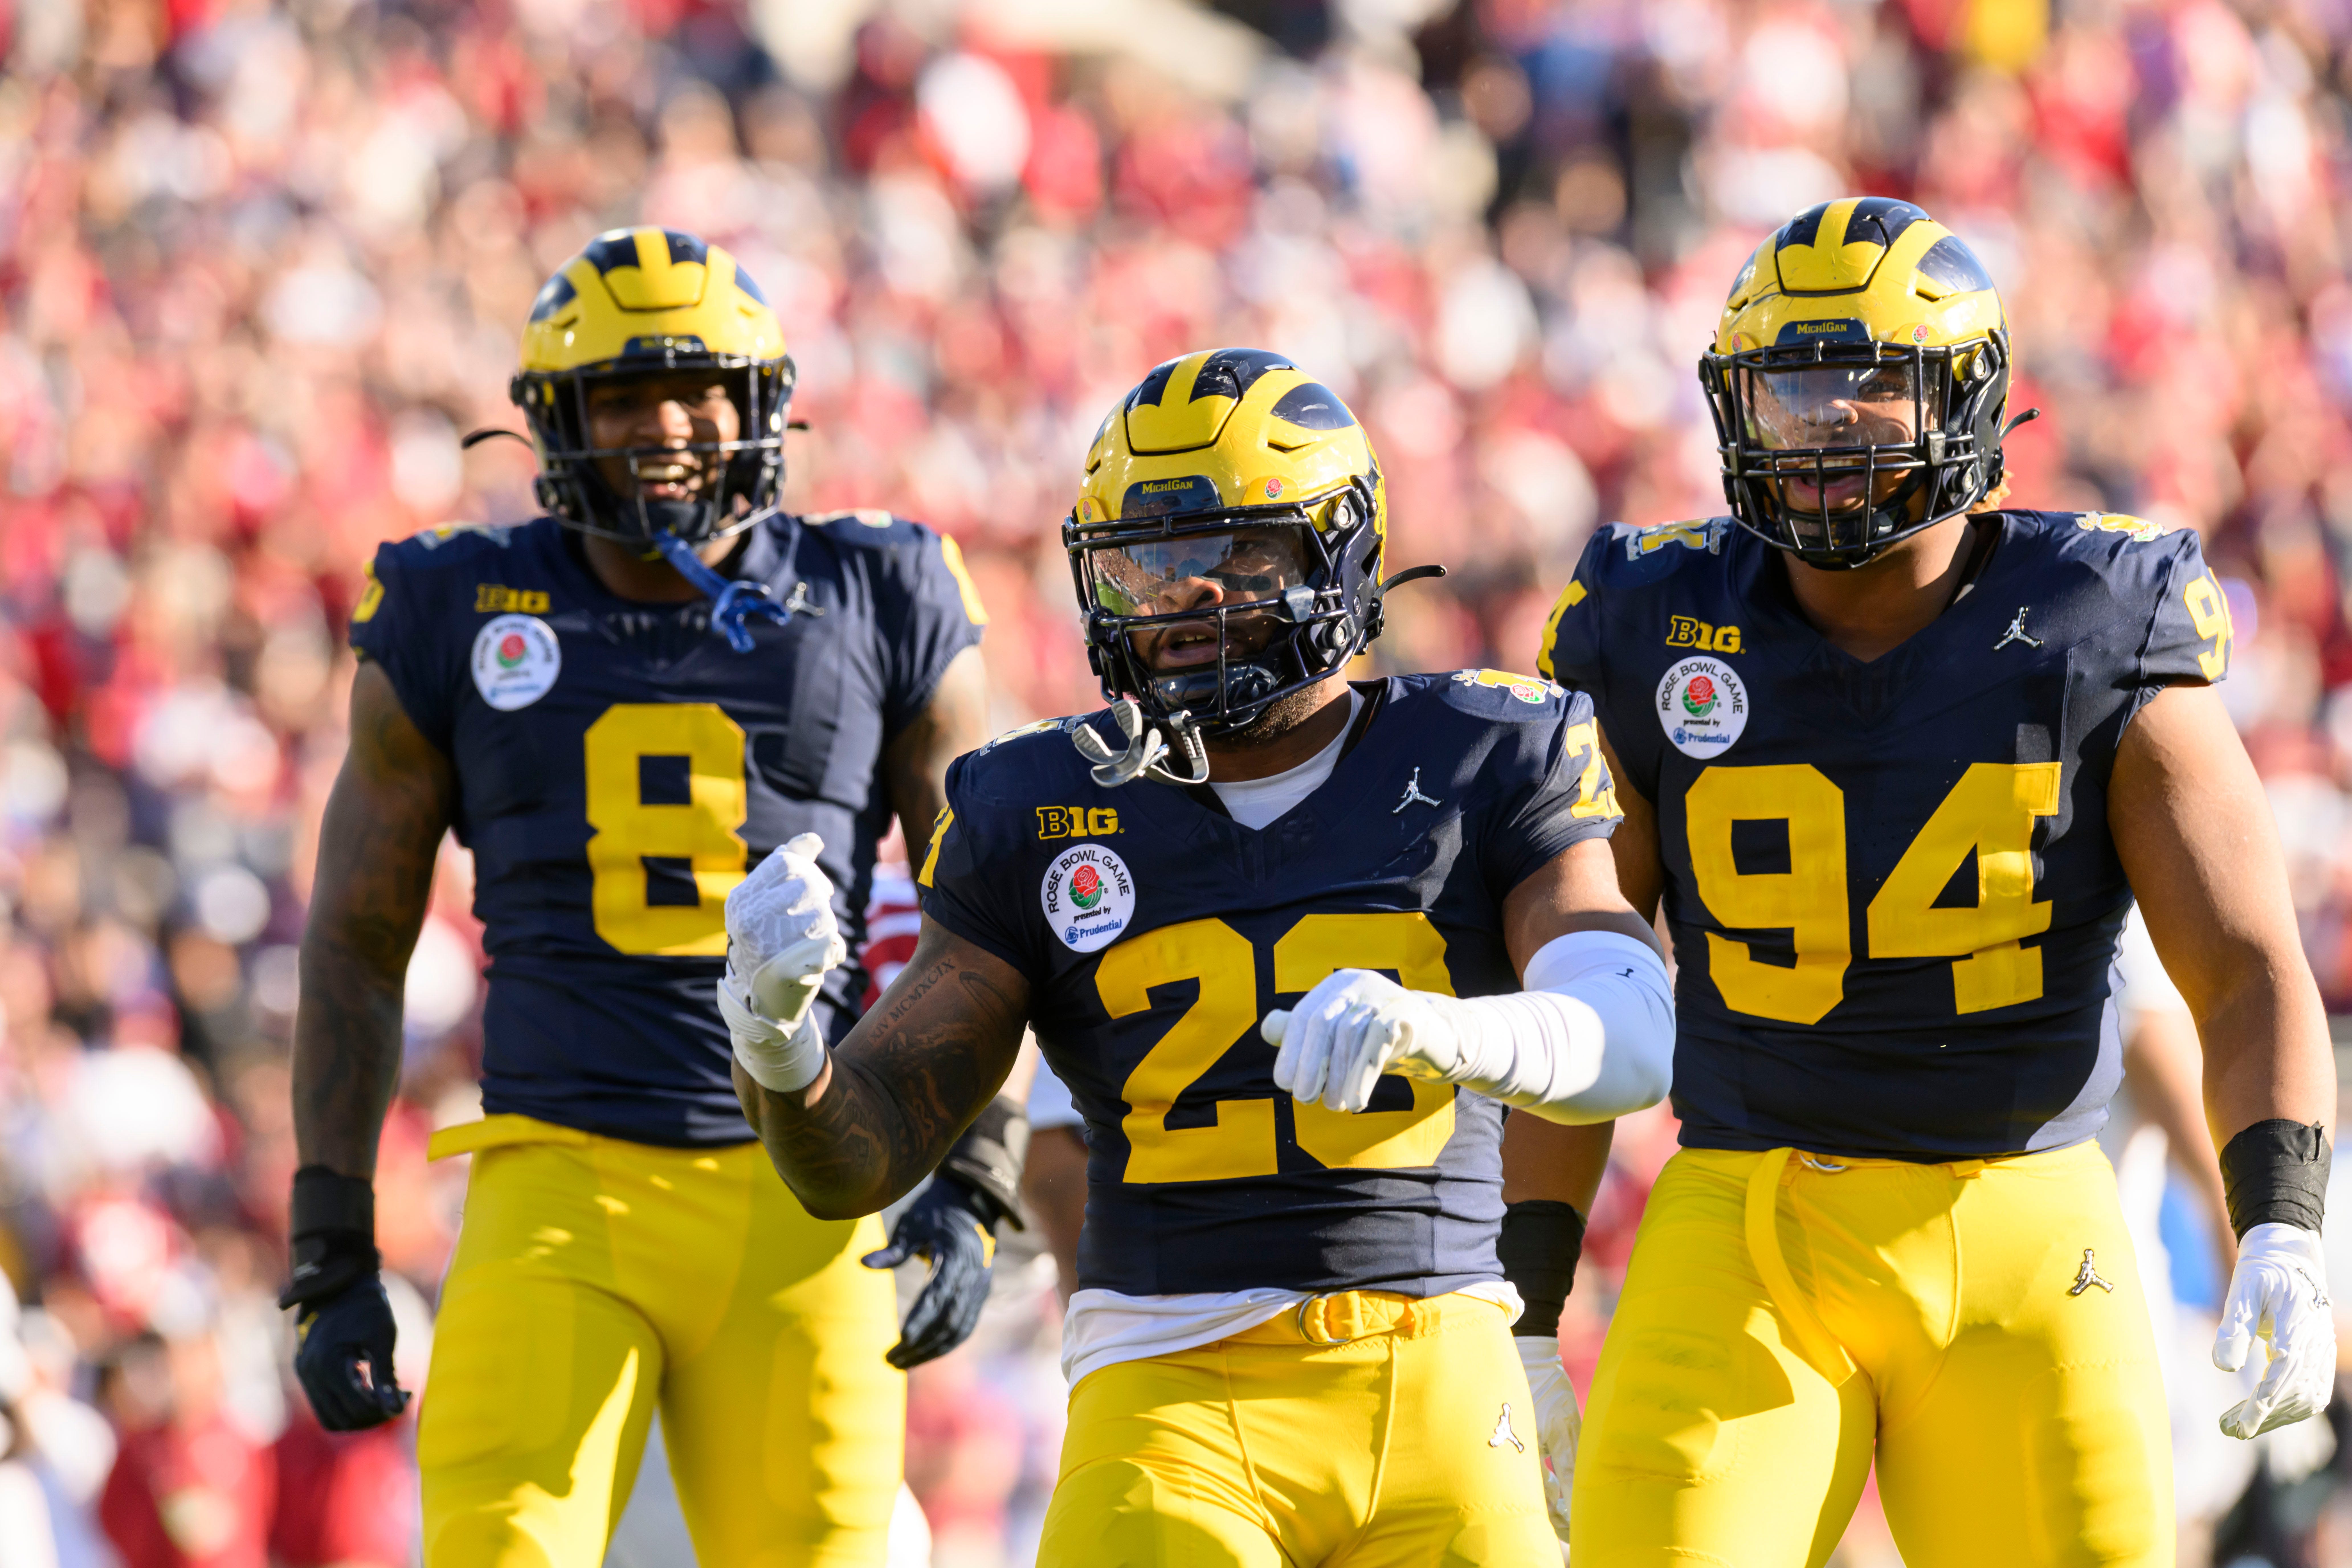 Michigan linebacker Michael Barrett celebrates after a sack during the second quarter of the Rose Bowl, in Pasadena, California, January 1, 2024.